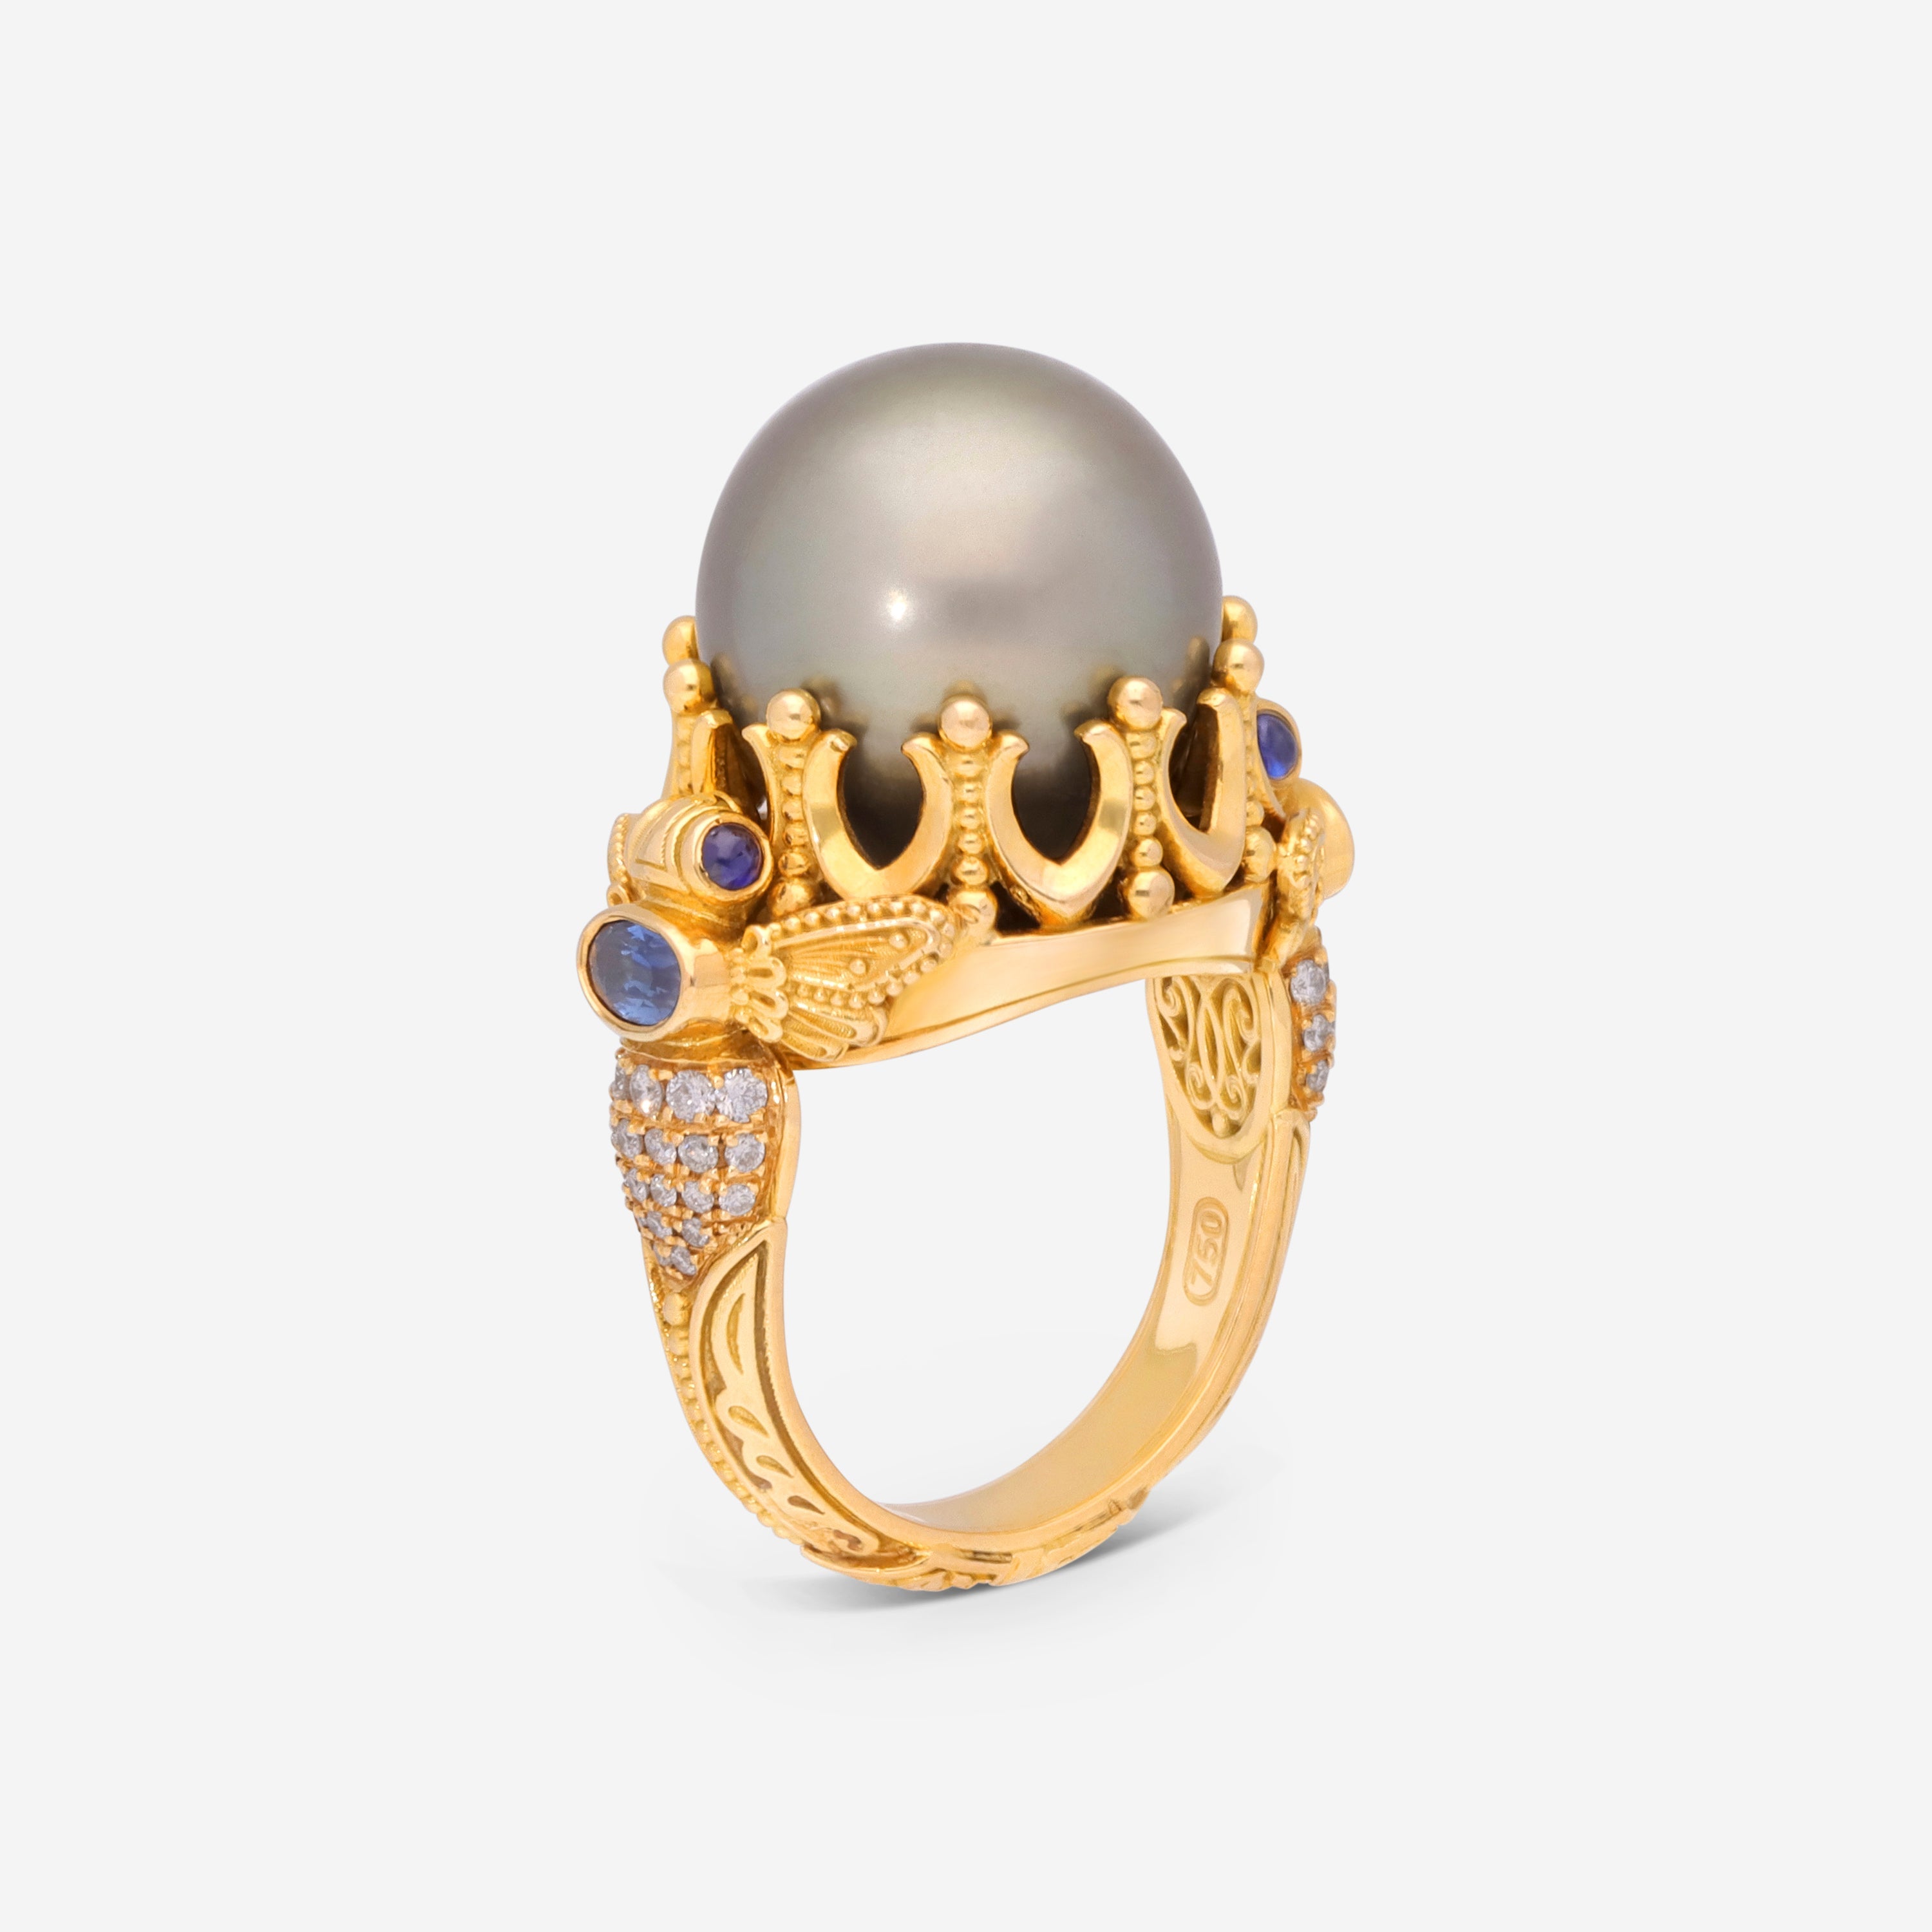 Konstantino Melissa 18k Yellow Gold, Sapphire And Pearl Ring